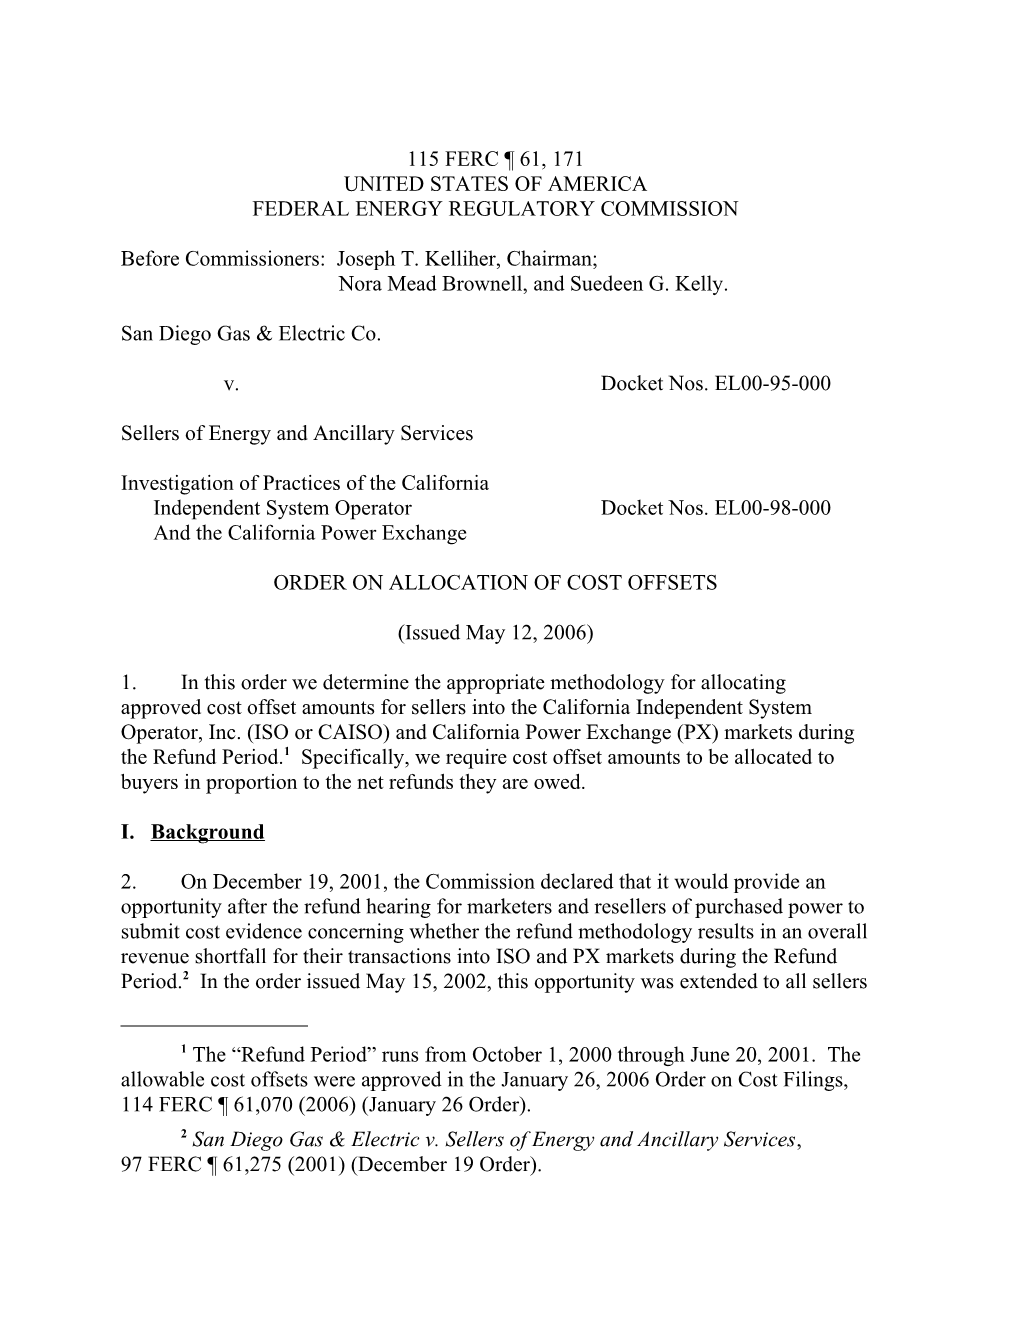 May 12, 2006 FERC Order on Allocation of Cost Offsets in Docket No. EL00-95-000 (Refund Case)